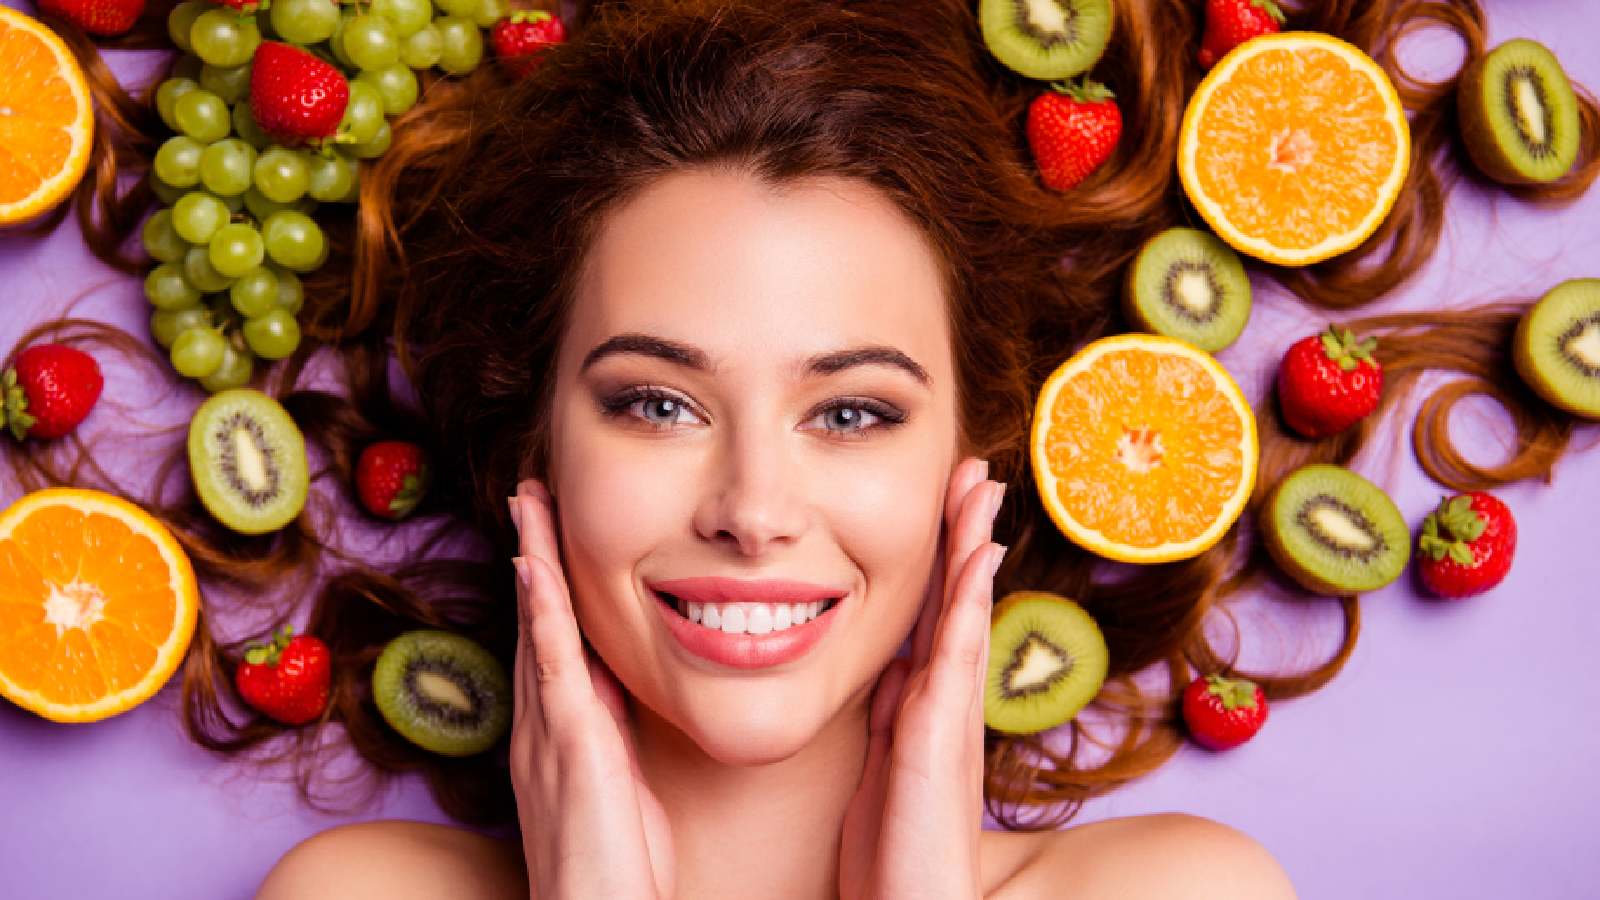 Try doing fruit facial at home for beautiful skin